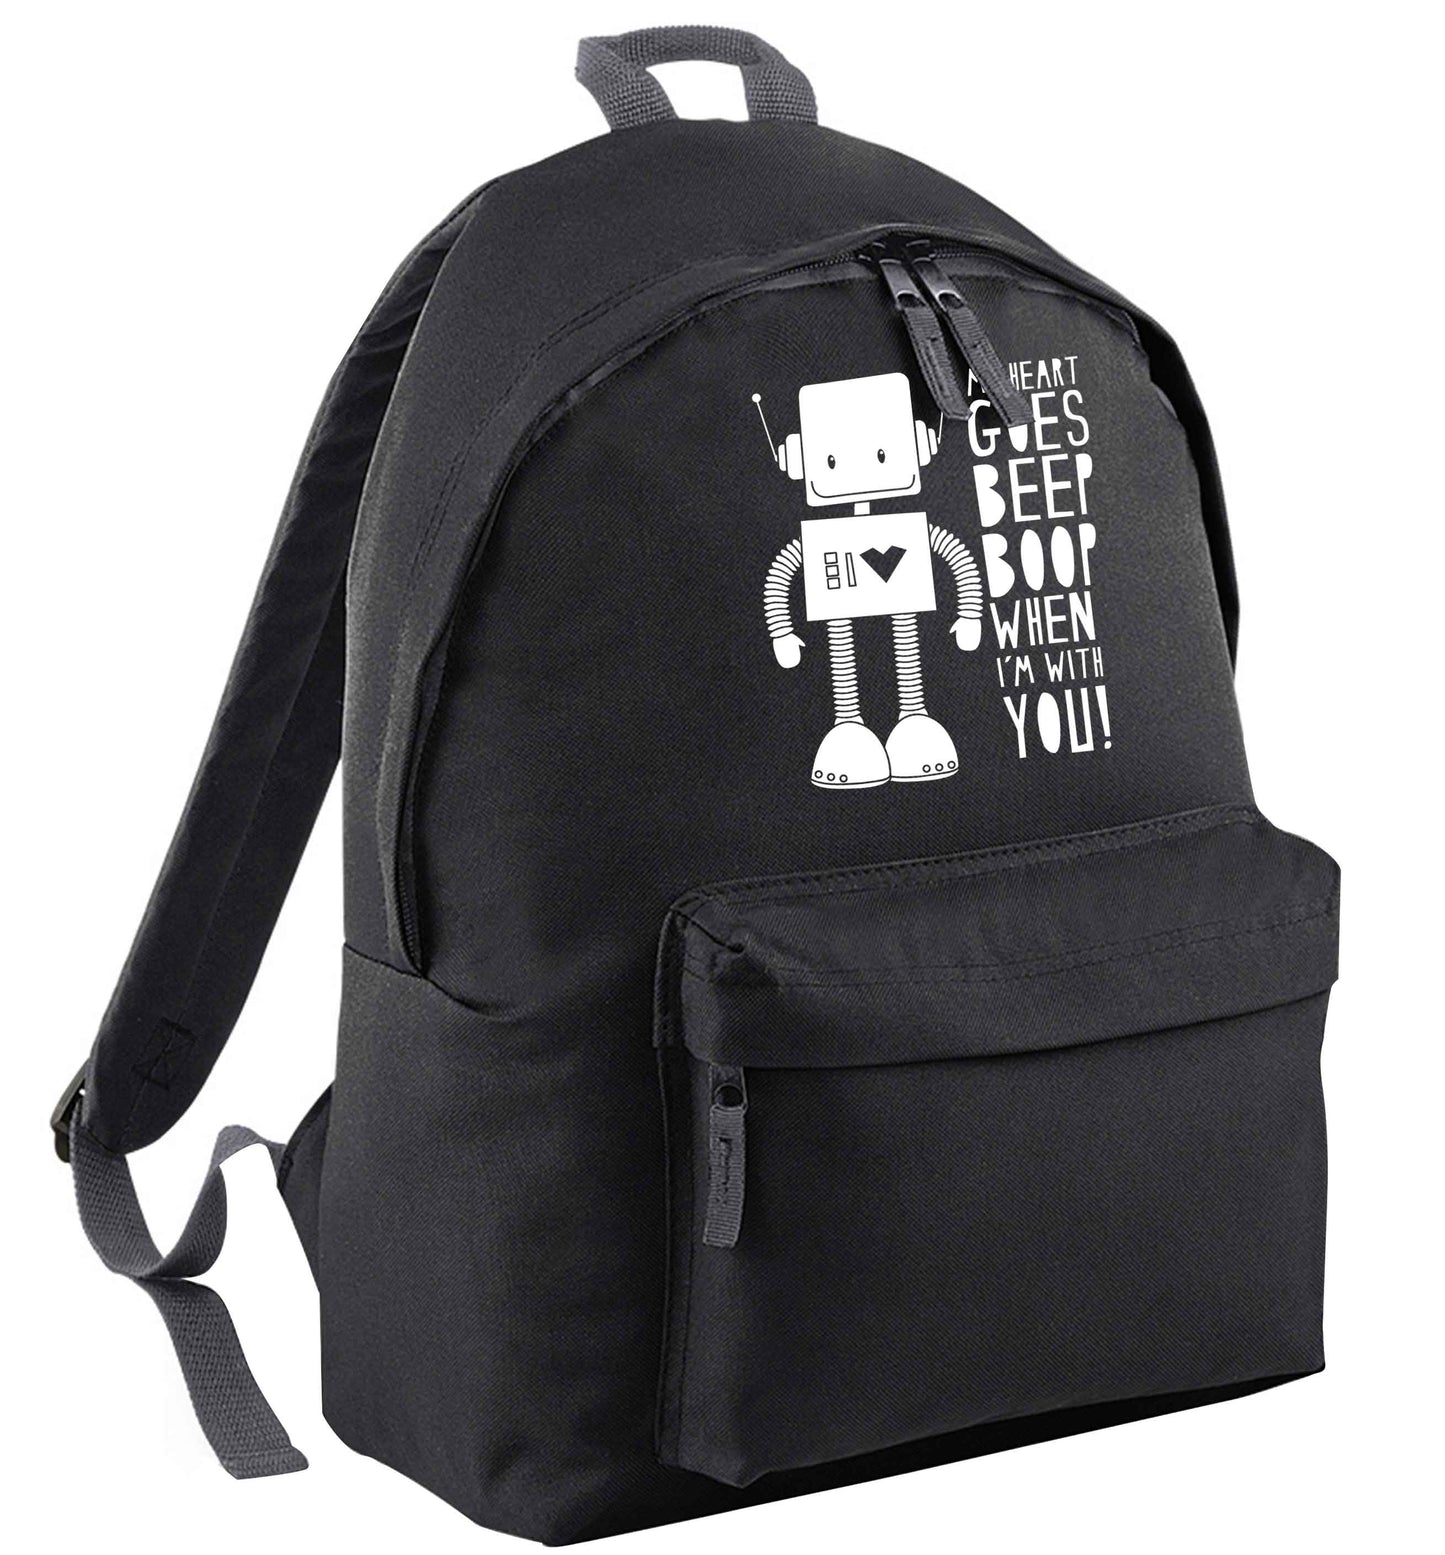 My heart goes beep boop when I'm with you black adults backpack